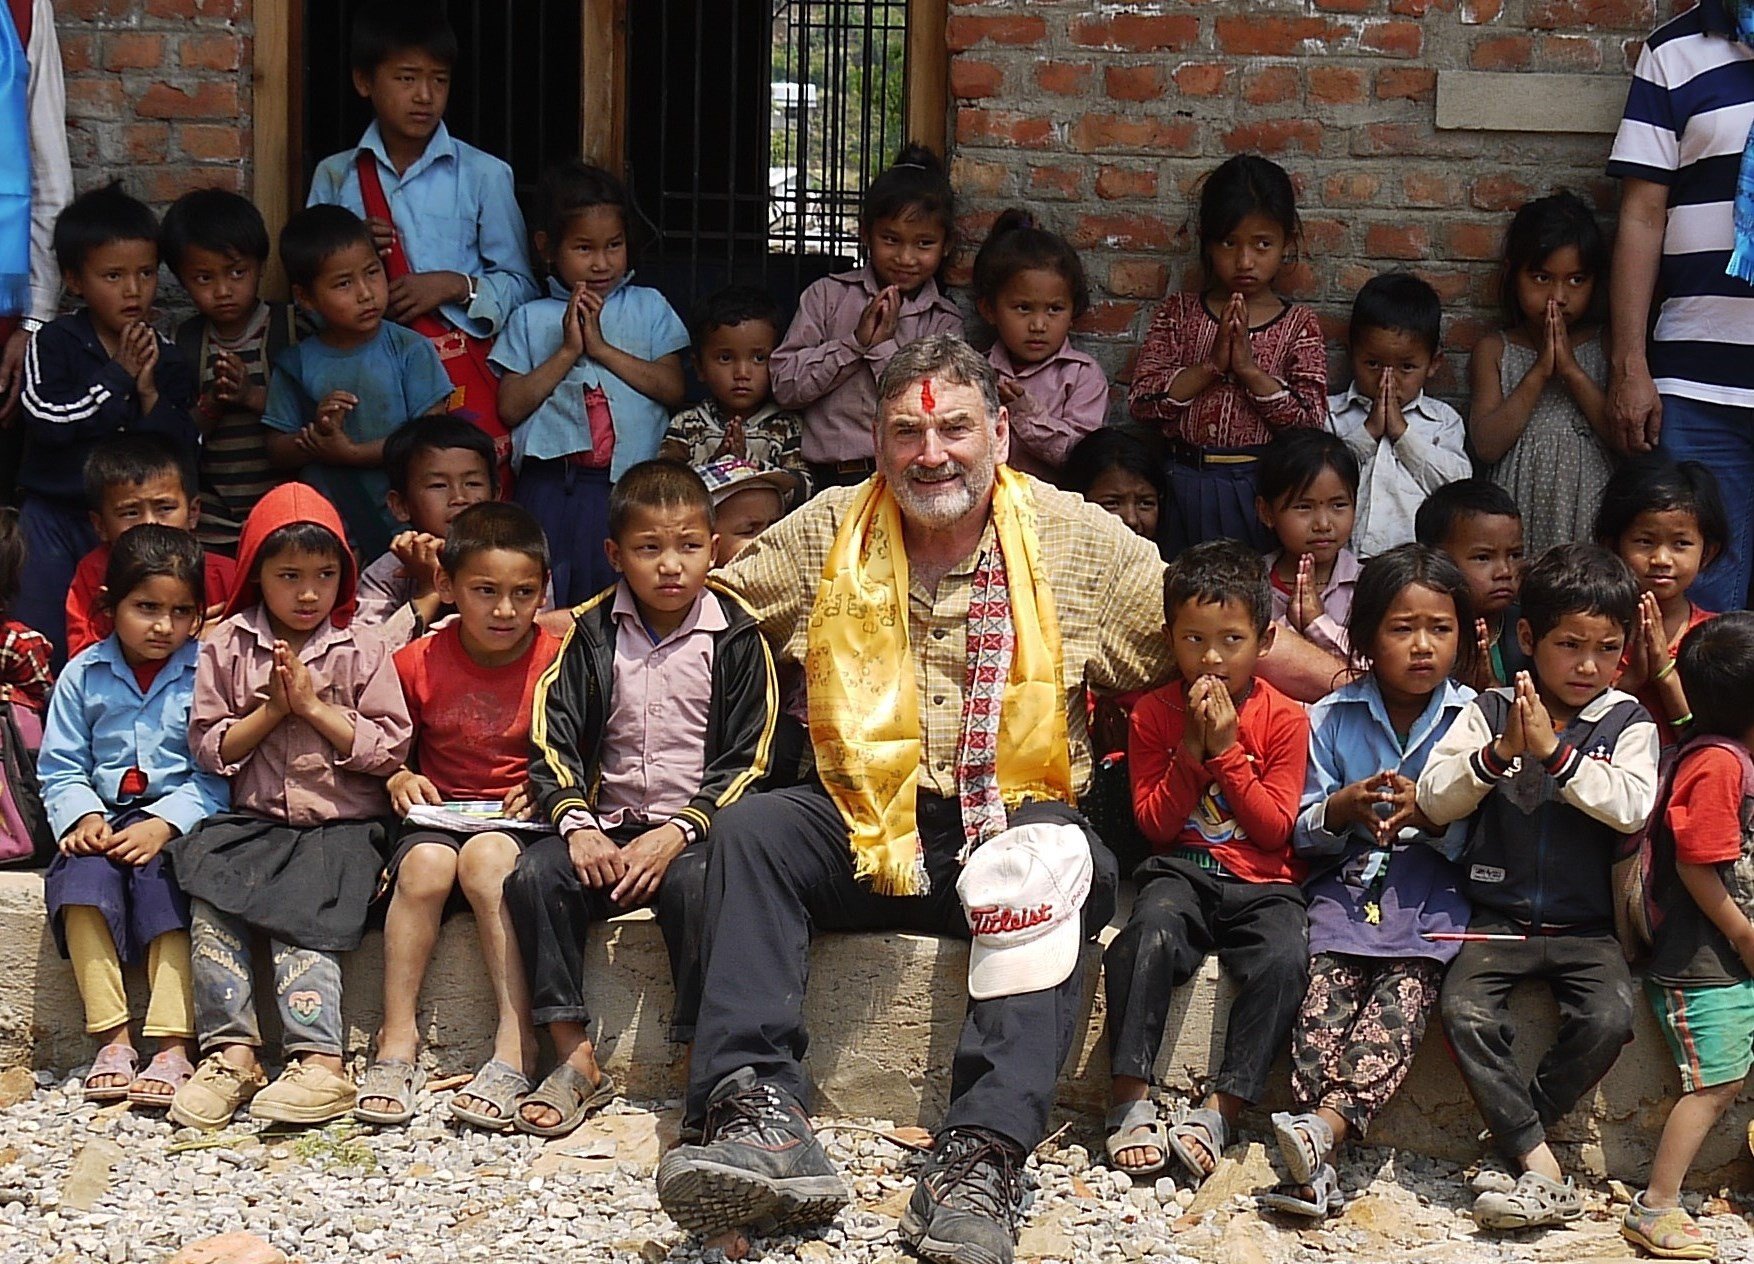 Roy Francis was part of the 1976 British Army expedition to climb Everest, and is now working to build schools in areas effect by the 2015 Nepal Earthquake. Photos: Aide Nepal Magnoac